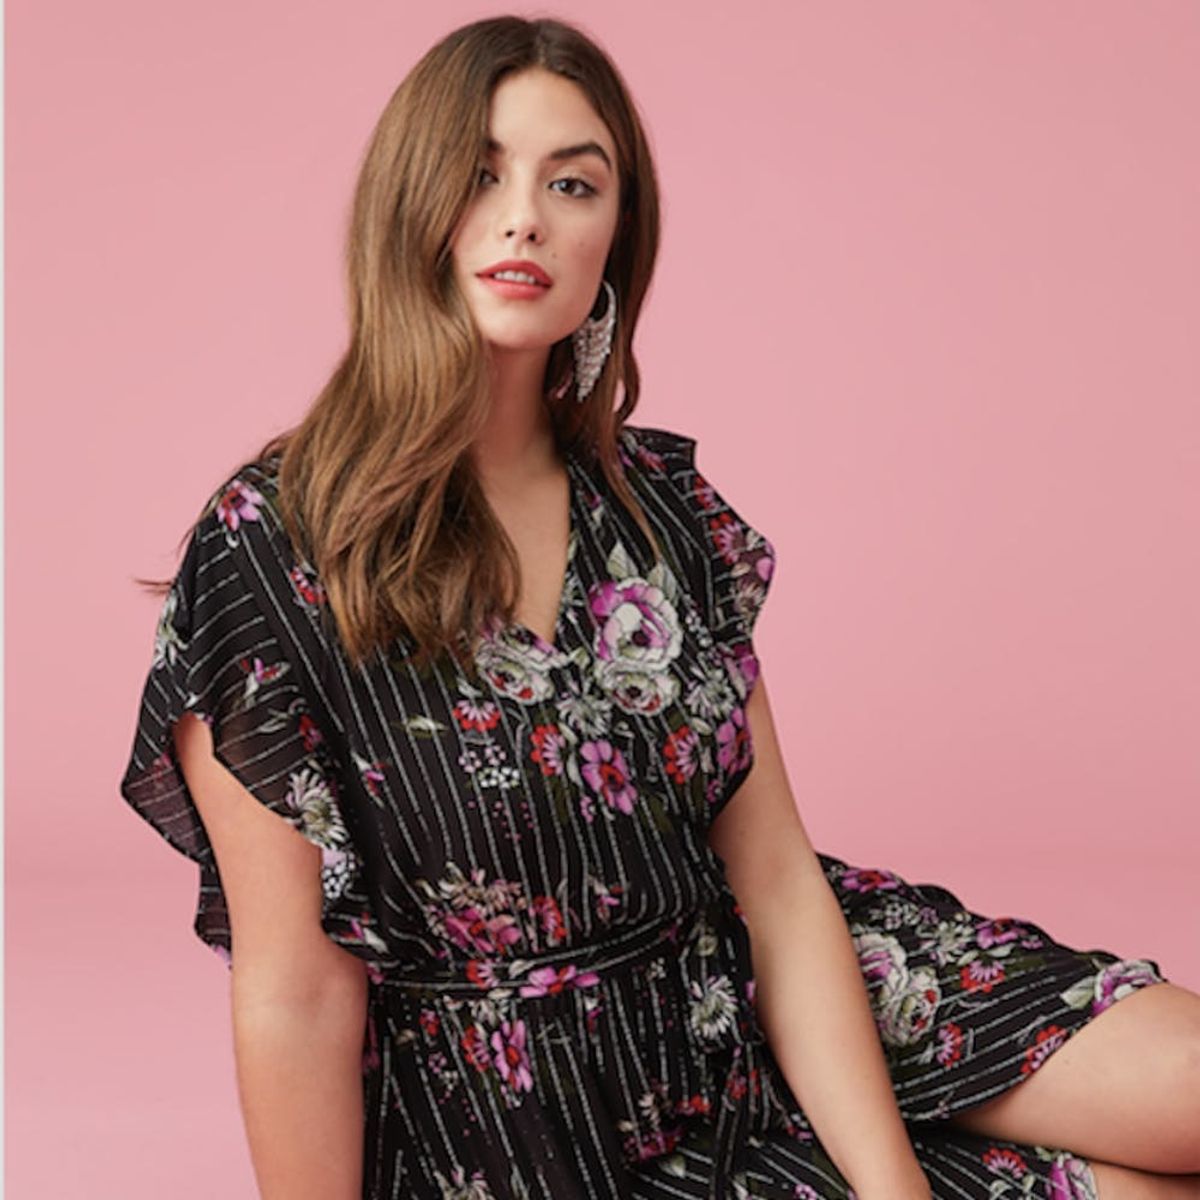 This New Online Retailer Carries All Your Favorite Brands in Sizes 10-26